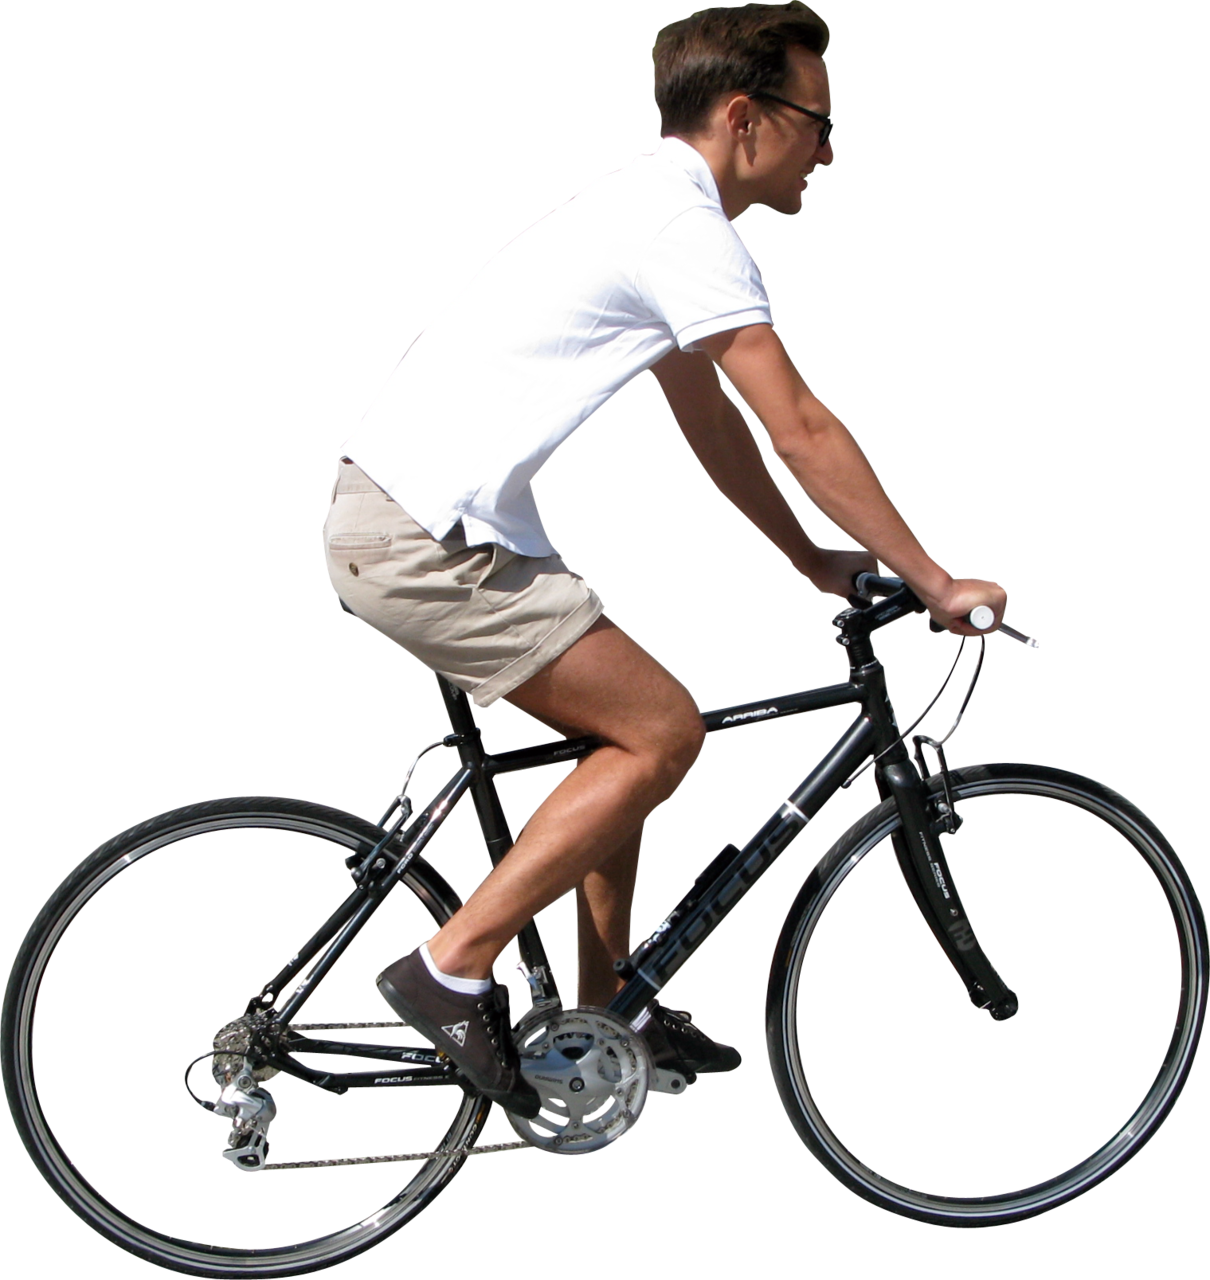 Casual Cyclist Riding Bike PNG image